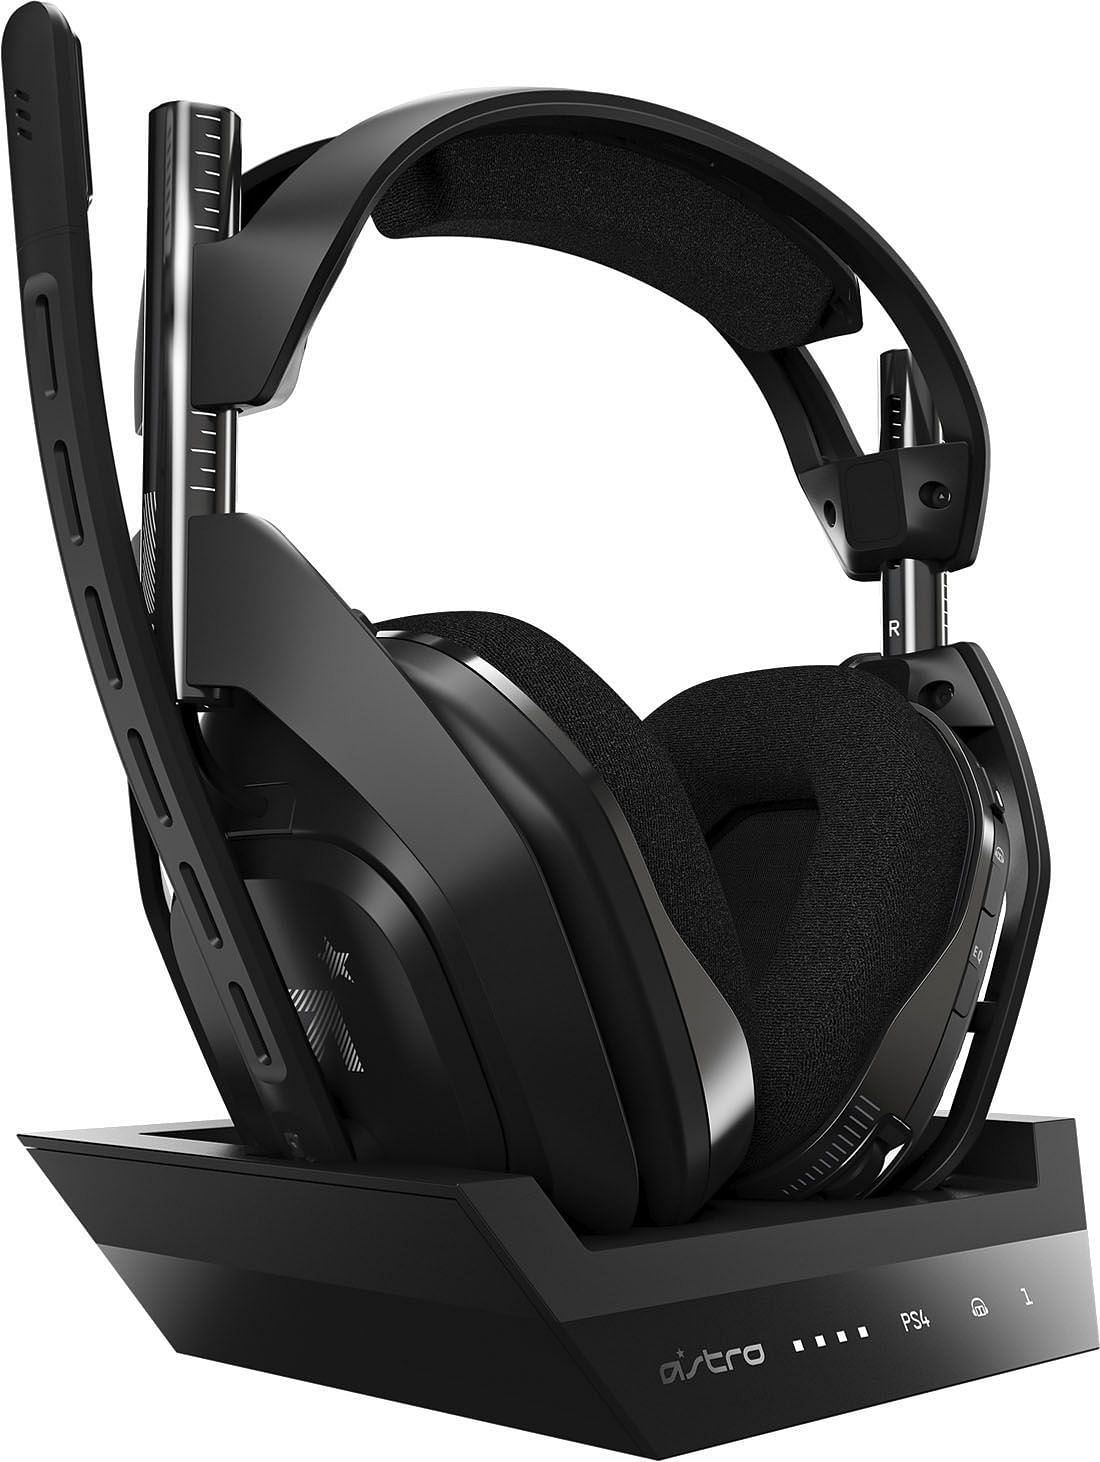 The Astro Gaming A50 Wireless (Image via Best Buy)